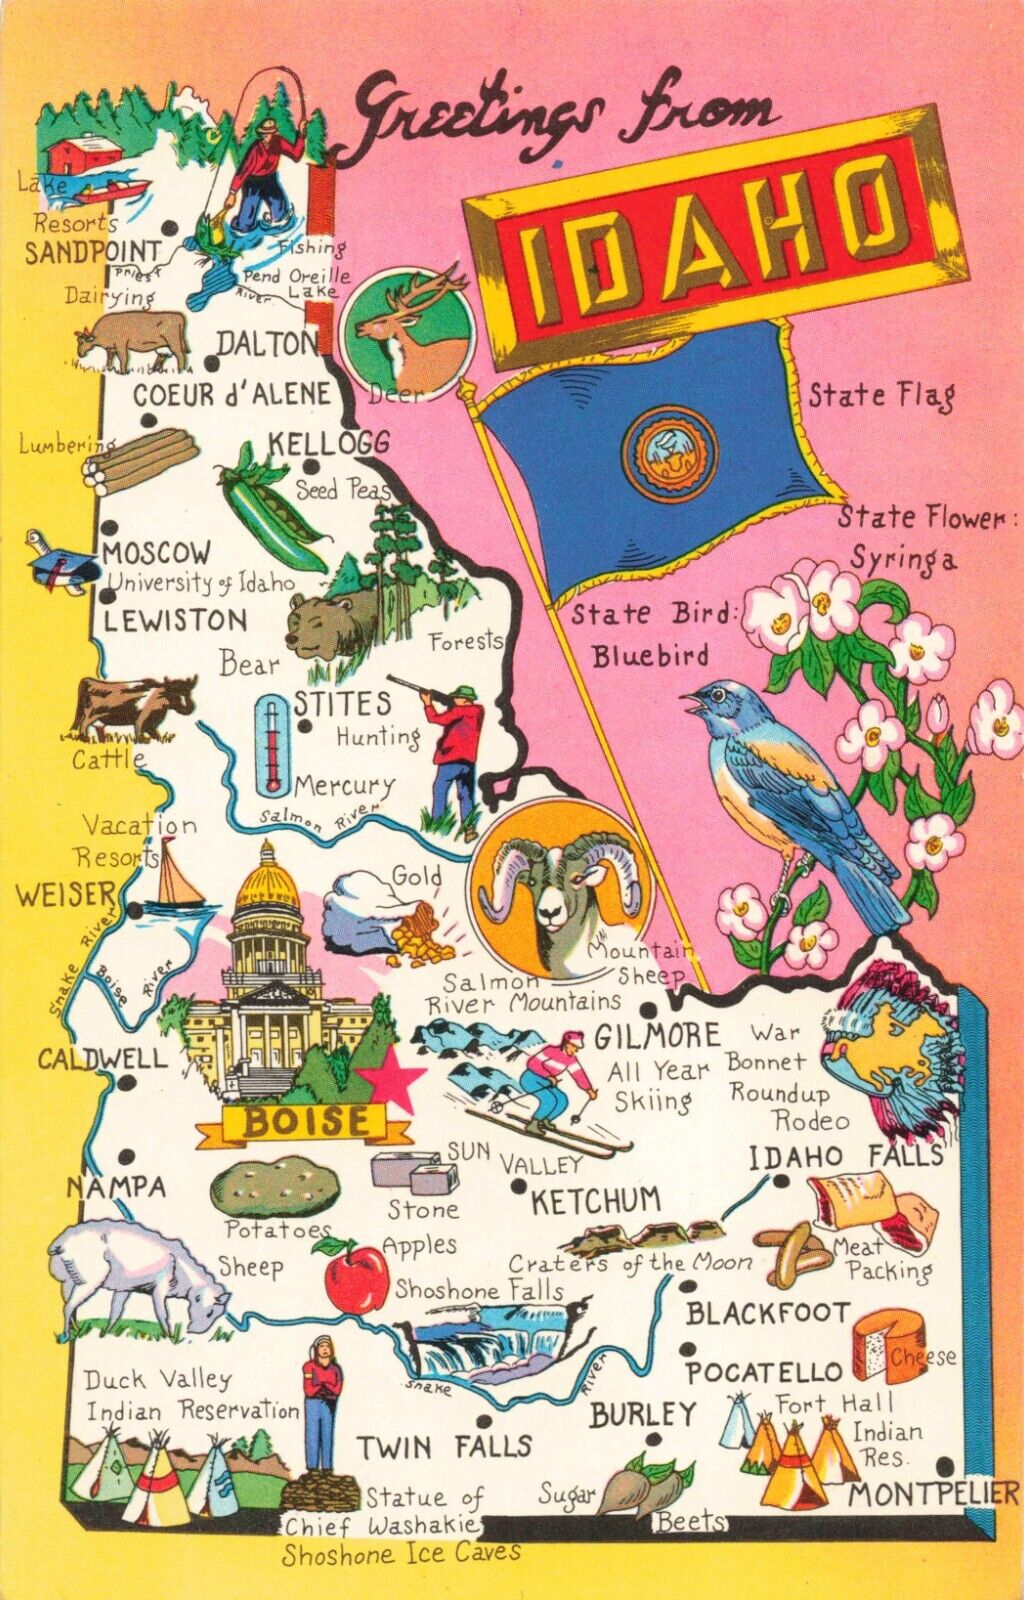 Greetings from Idaho, Map of Landmarks & Attractions, Vintage Postcard